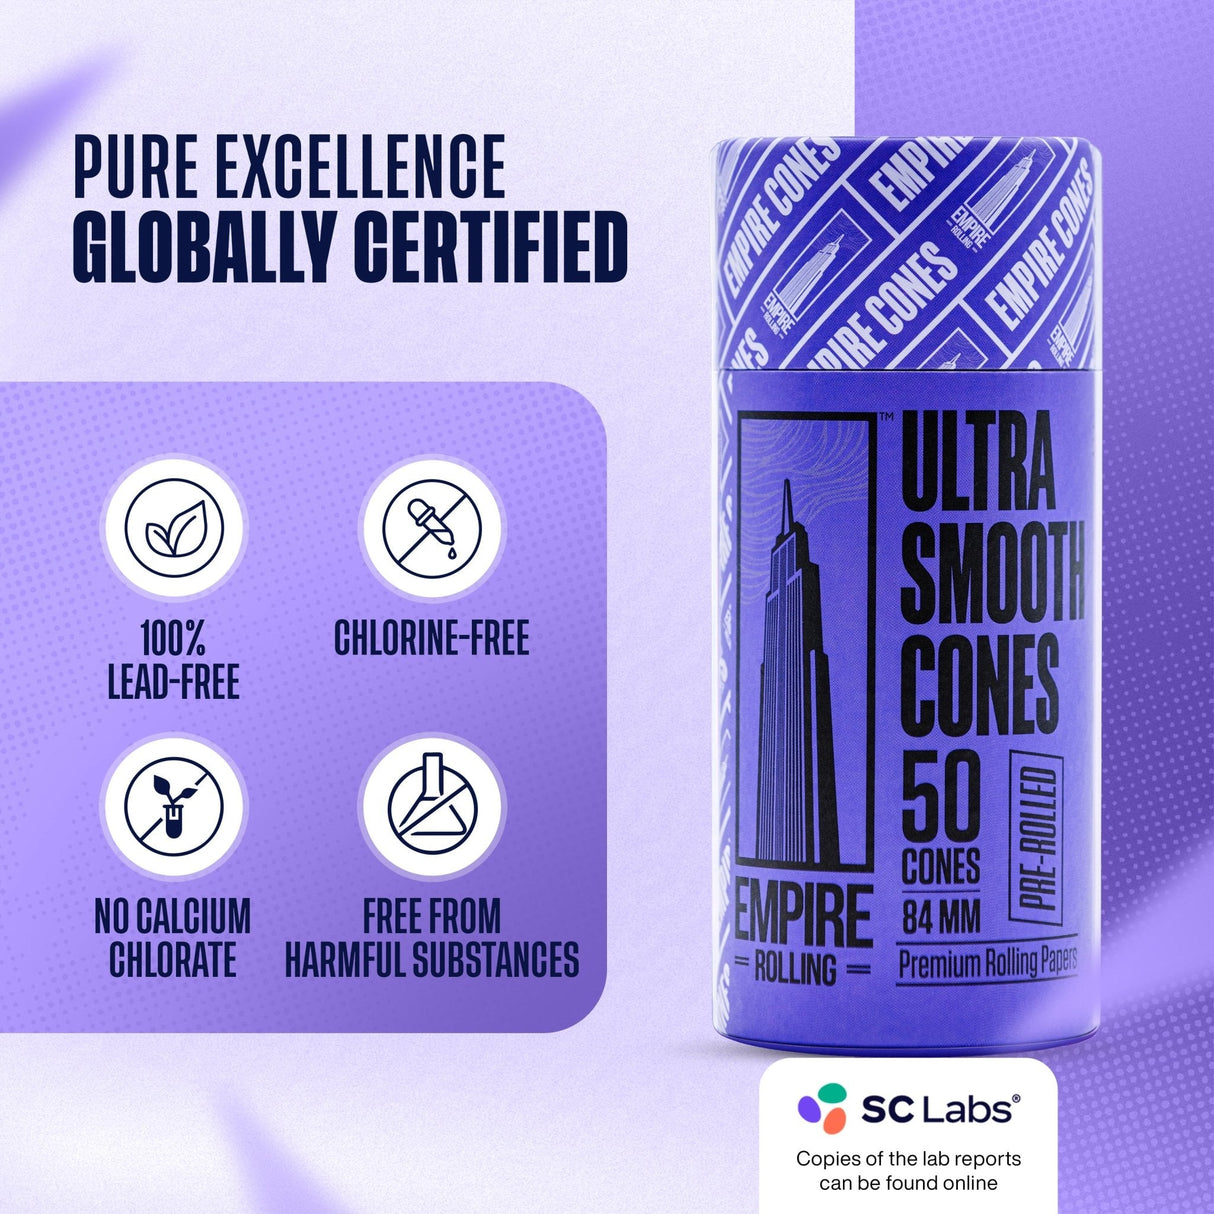 Empire Rolling Papers Ultra Smooth Purple Cones, 50 Count, Front View with Certifications